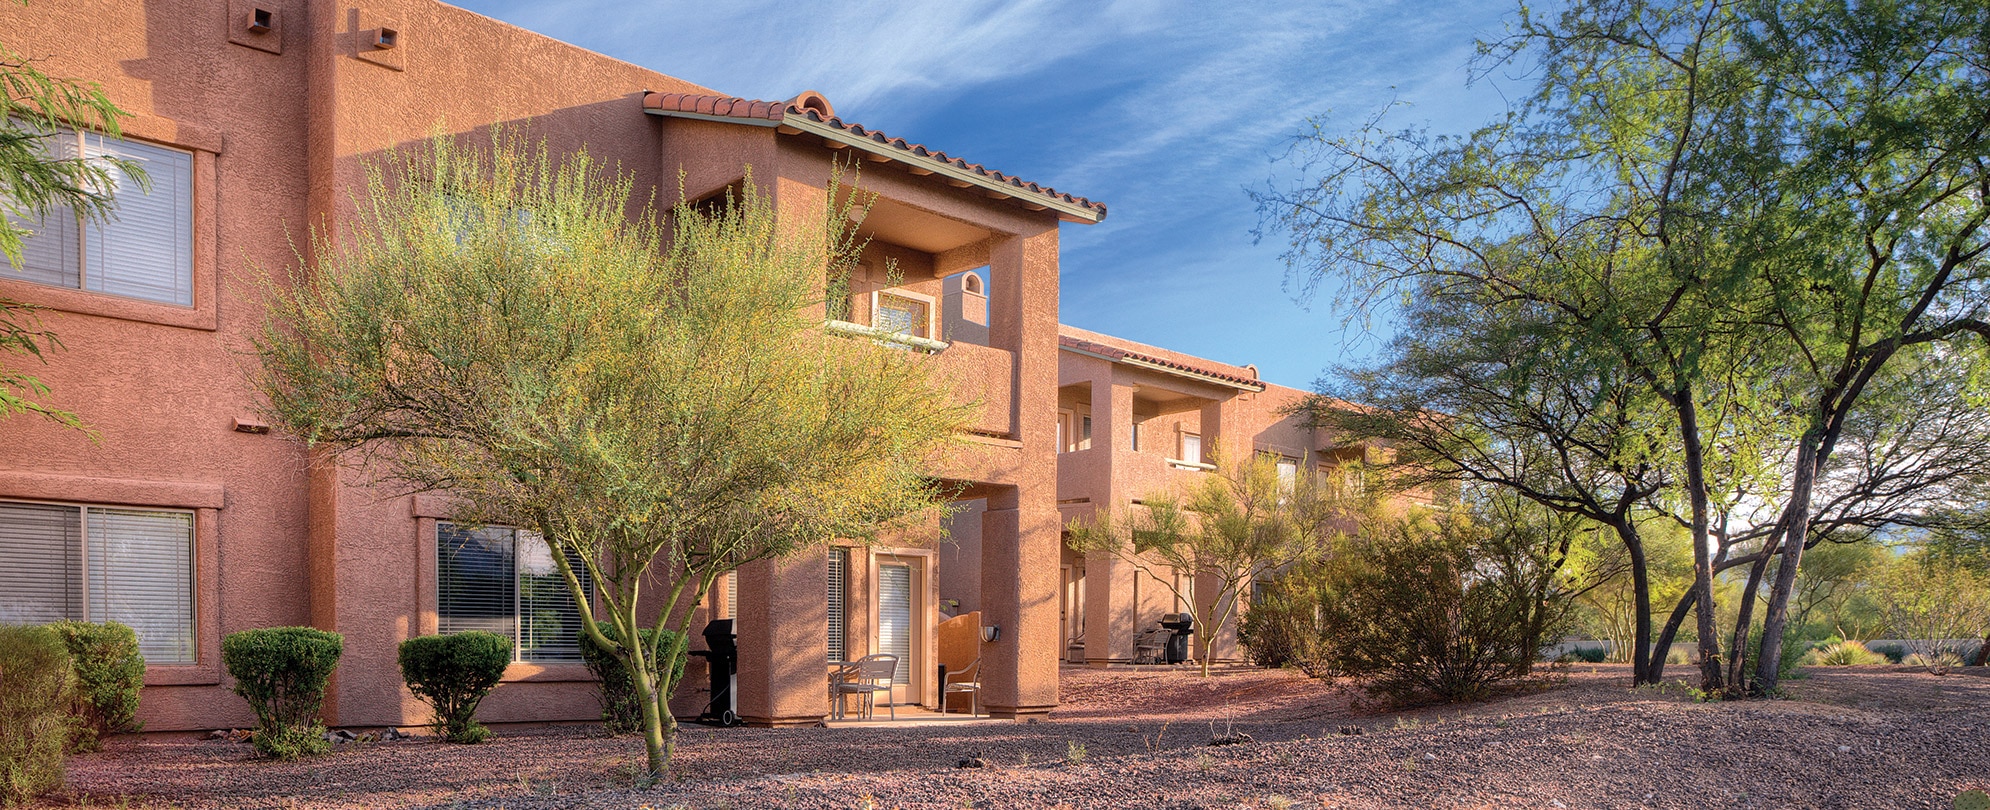 The exterior of Rancho Vistoso, a timeshare resort in Oro Valley, Arizona with spacious suites perfect for a desert vacation.